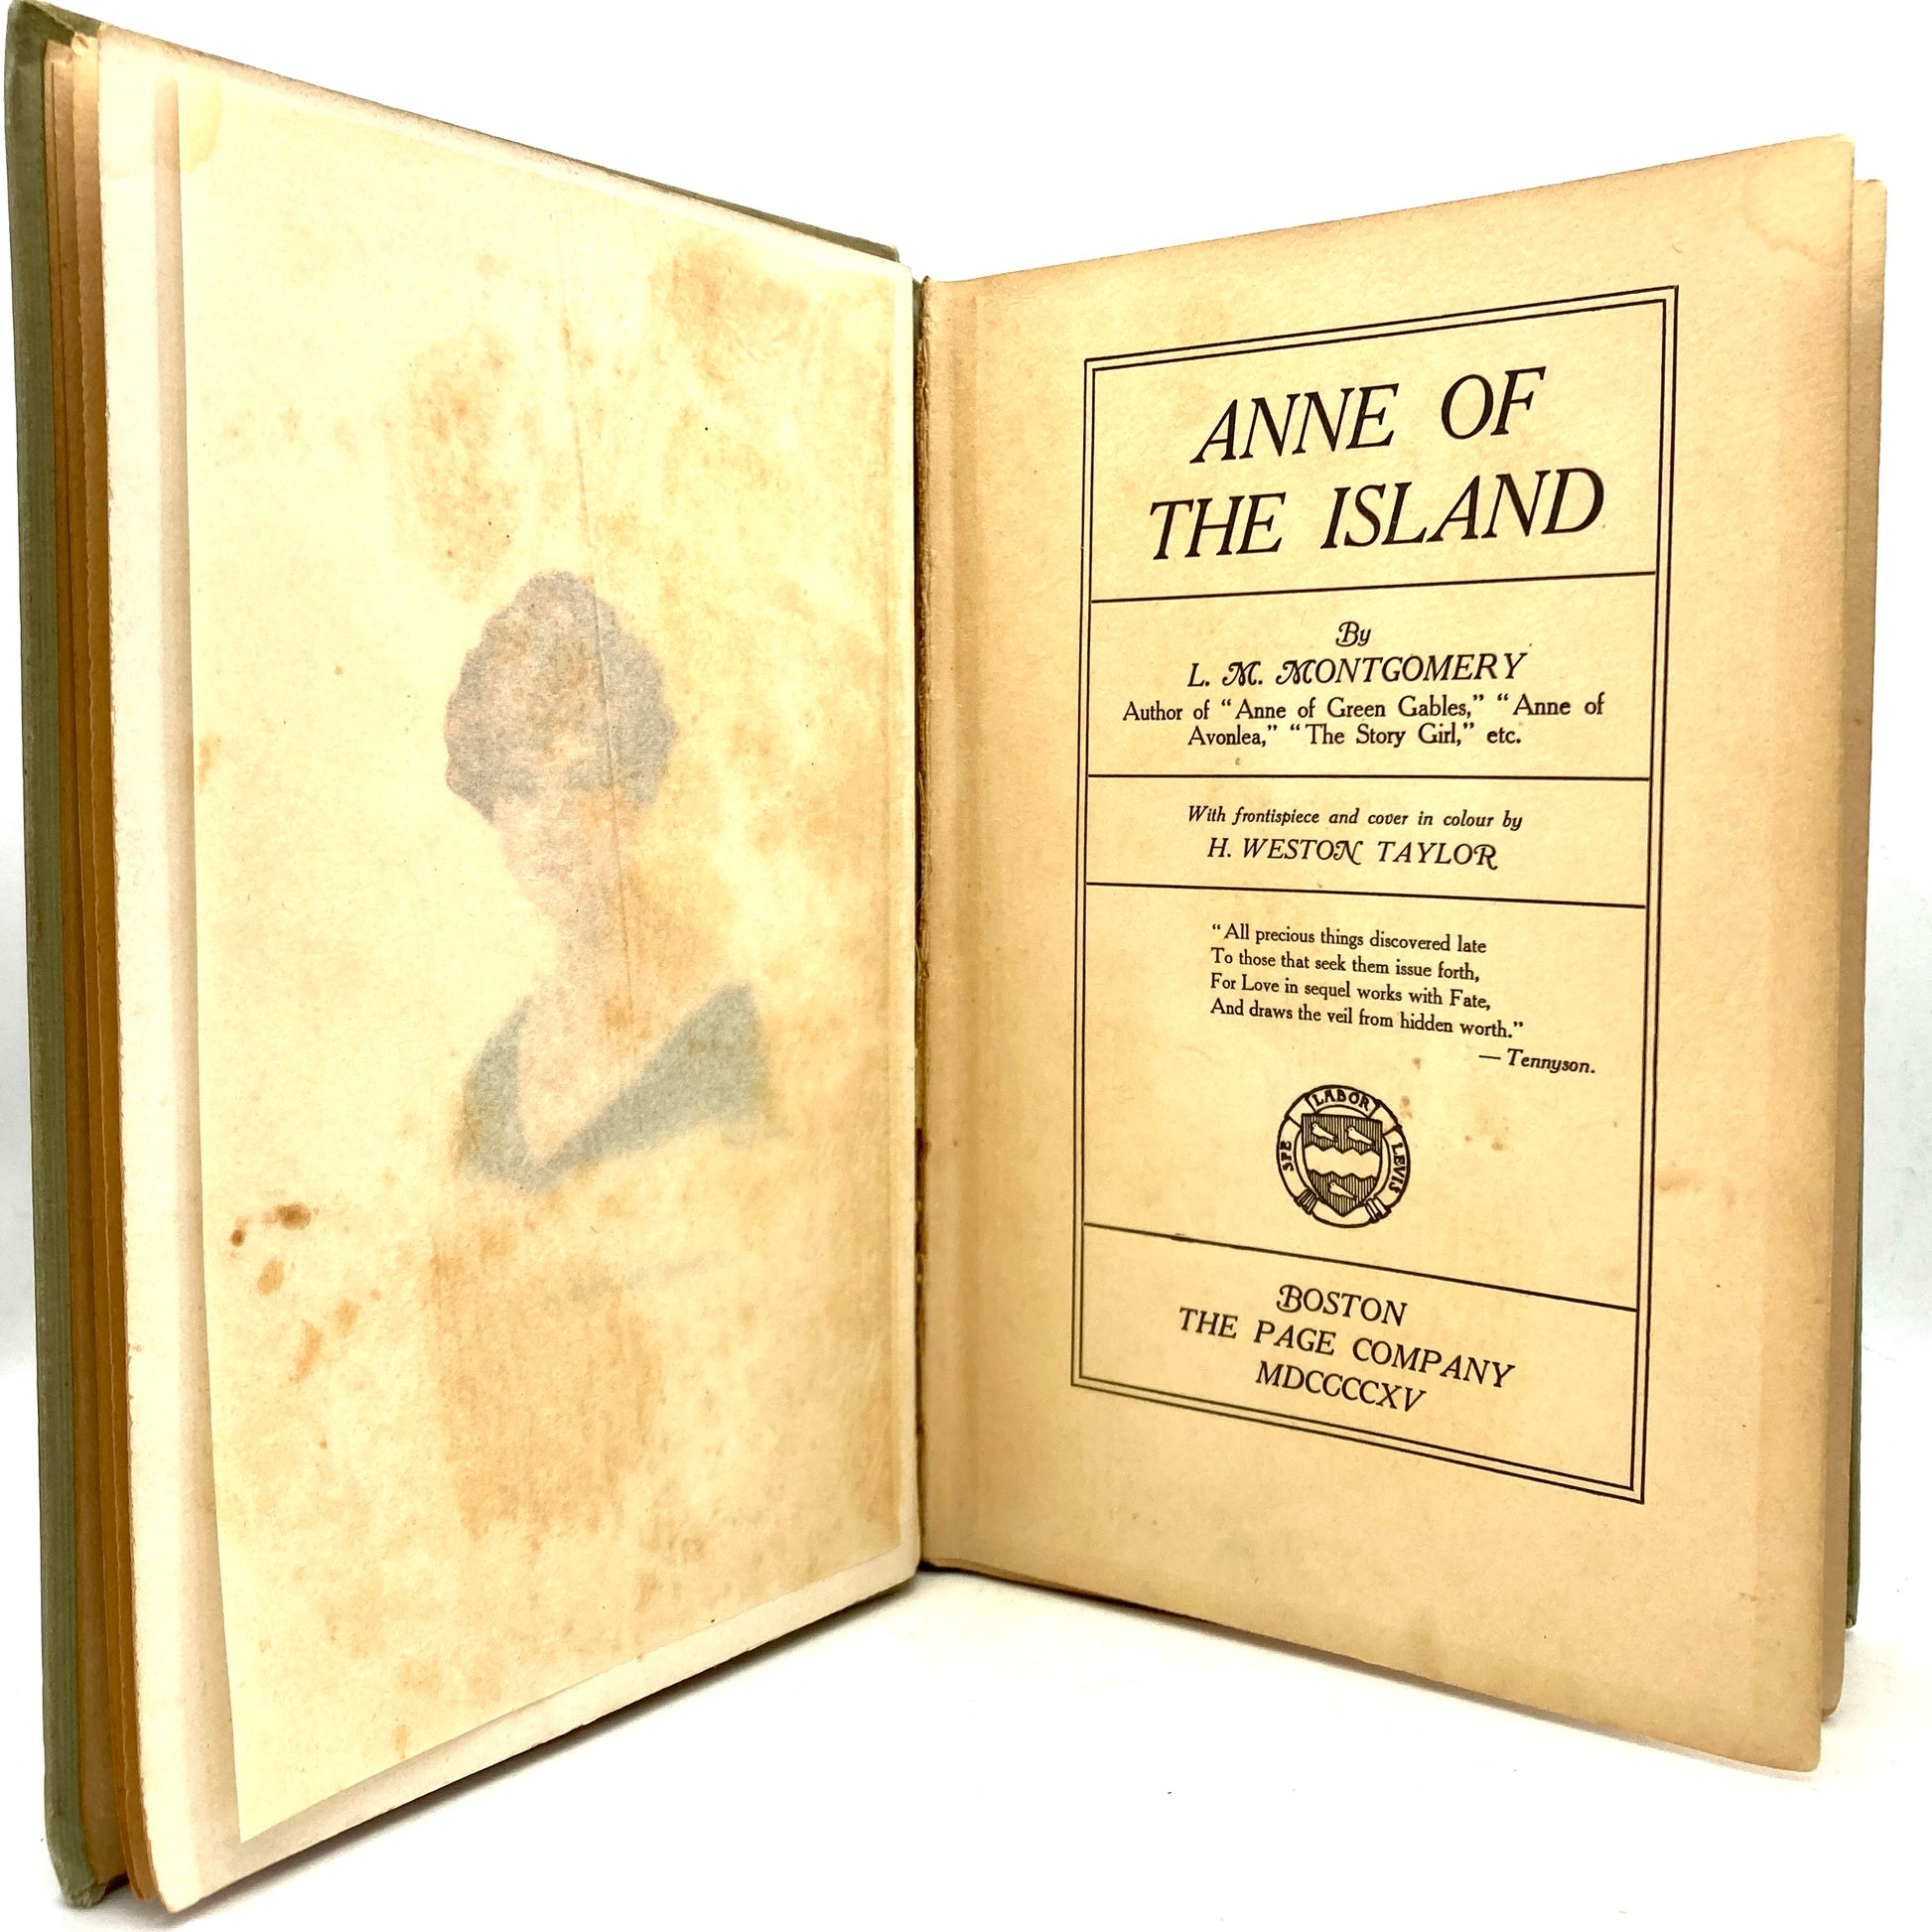 MONTGOMERY, L.M. "Anne of the Island" [LC Page, 1915] 1st Edition/2nd - Buzz Bookstore